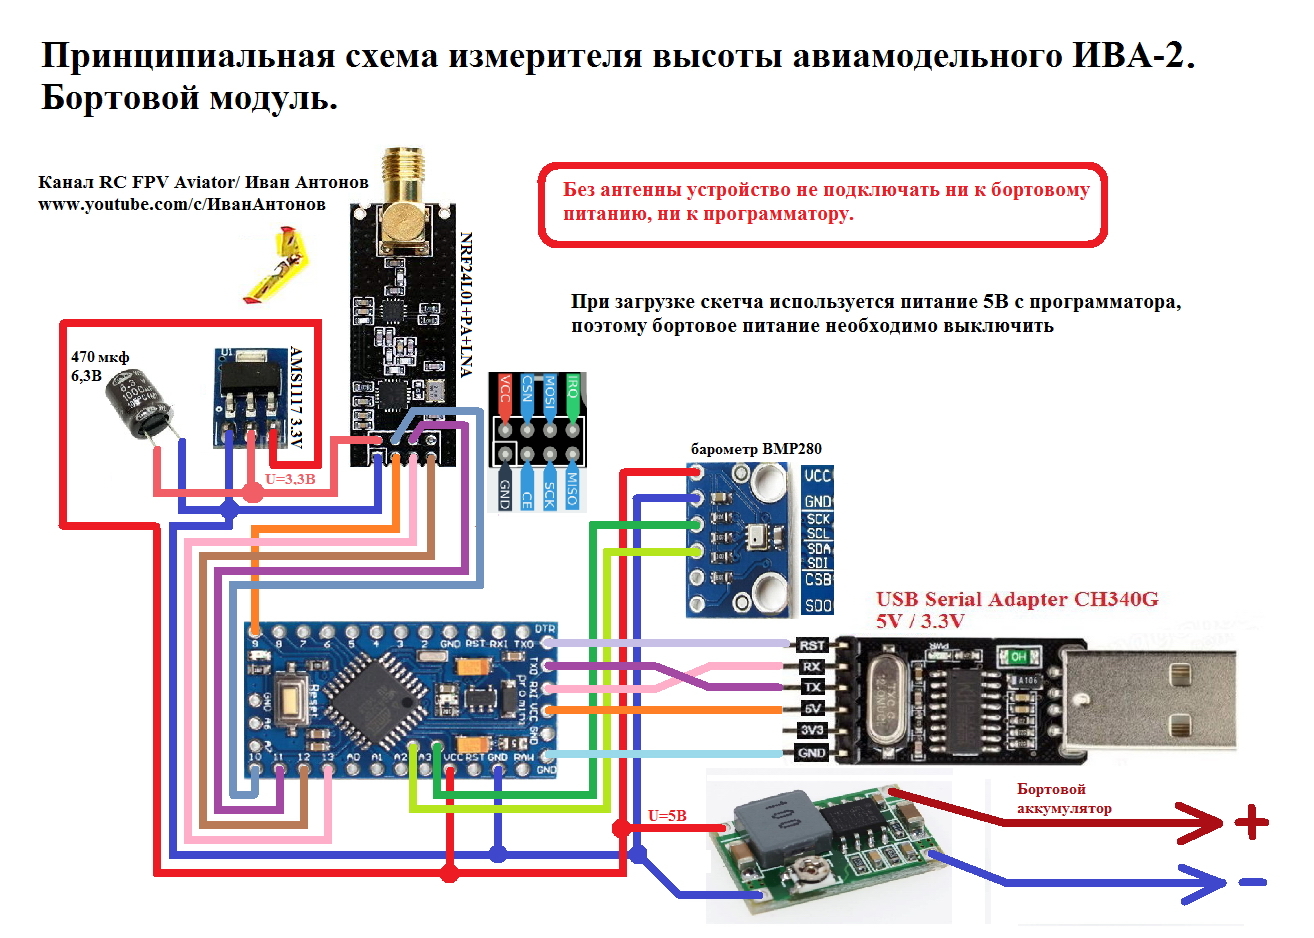 Aircraft model altimeter IVA-2 with voice notification. - My, Arduino, Project, Atmega328, Aircraft modeling, , , , Video, With your own hands, Longpost